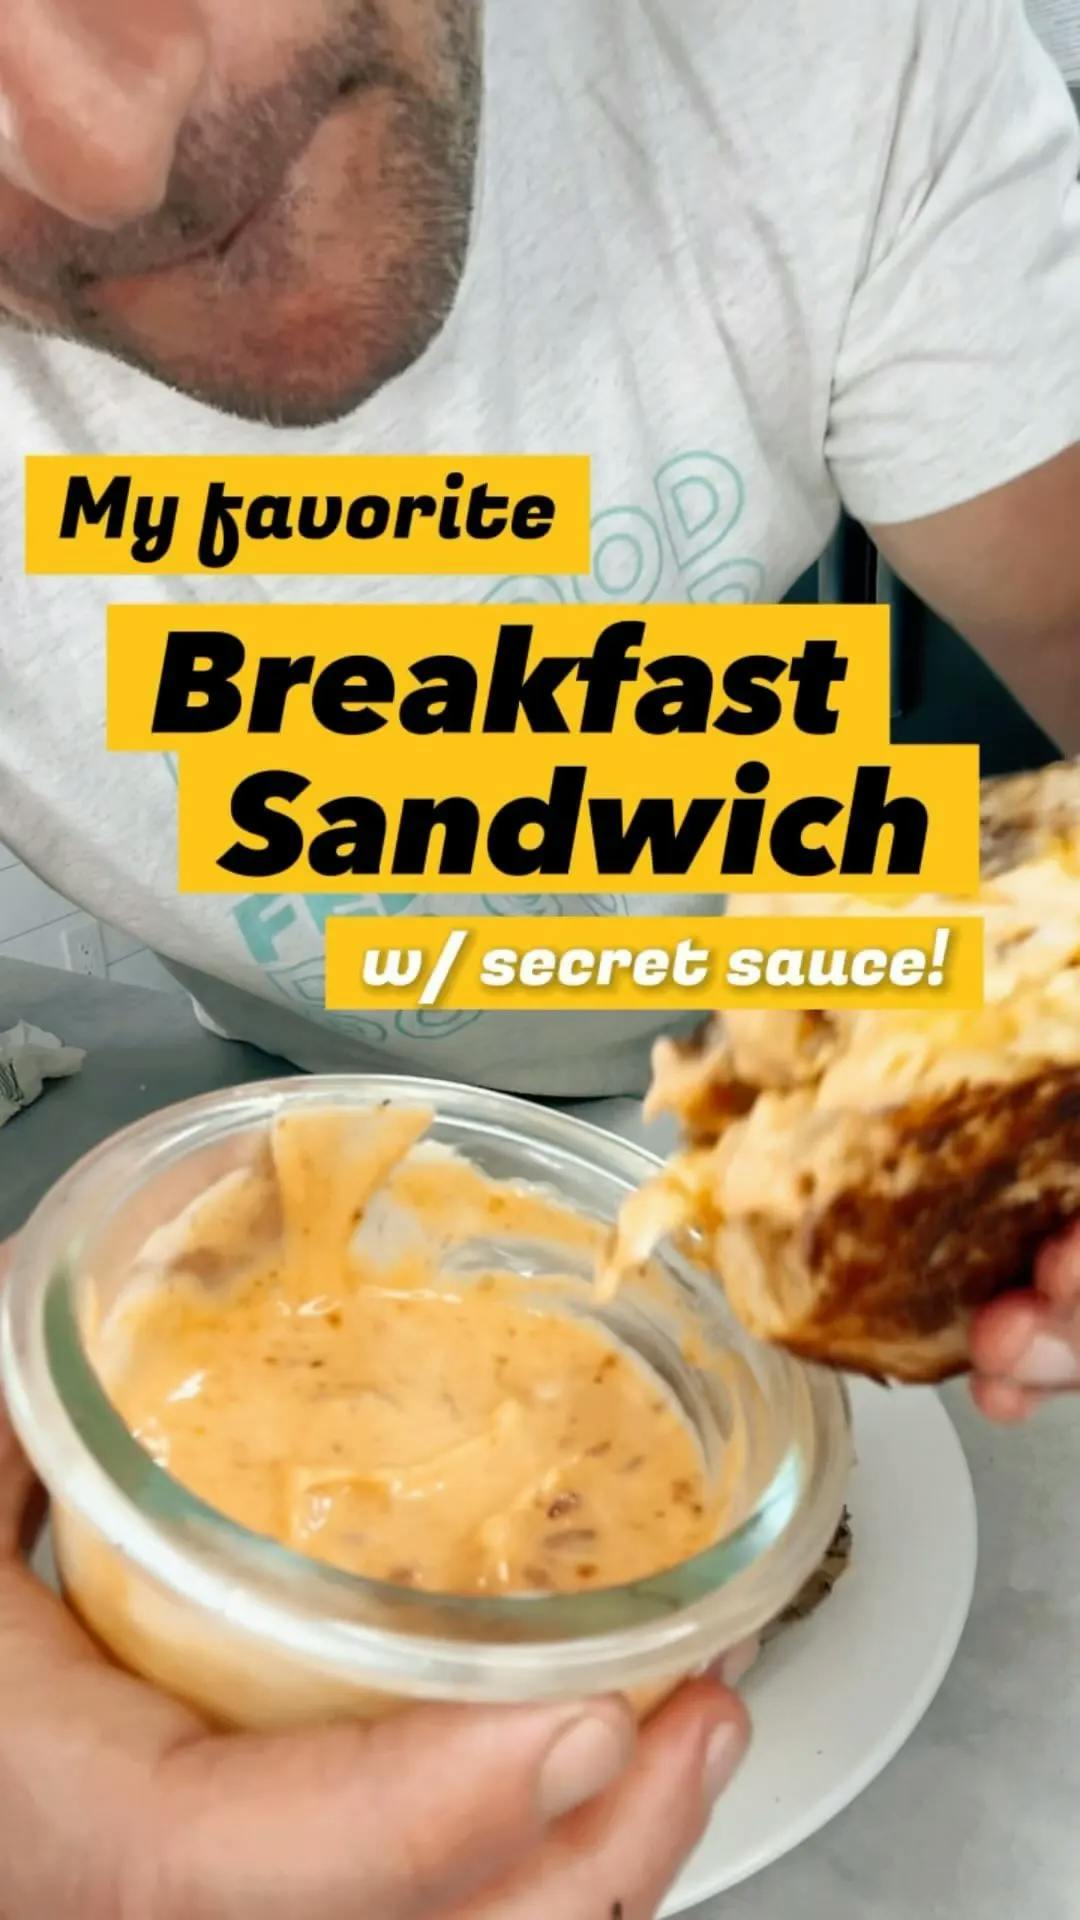 Picture for The Breakfast Sandwich